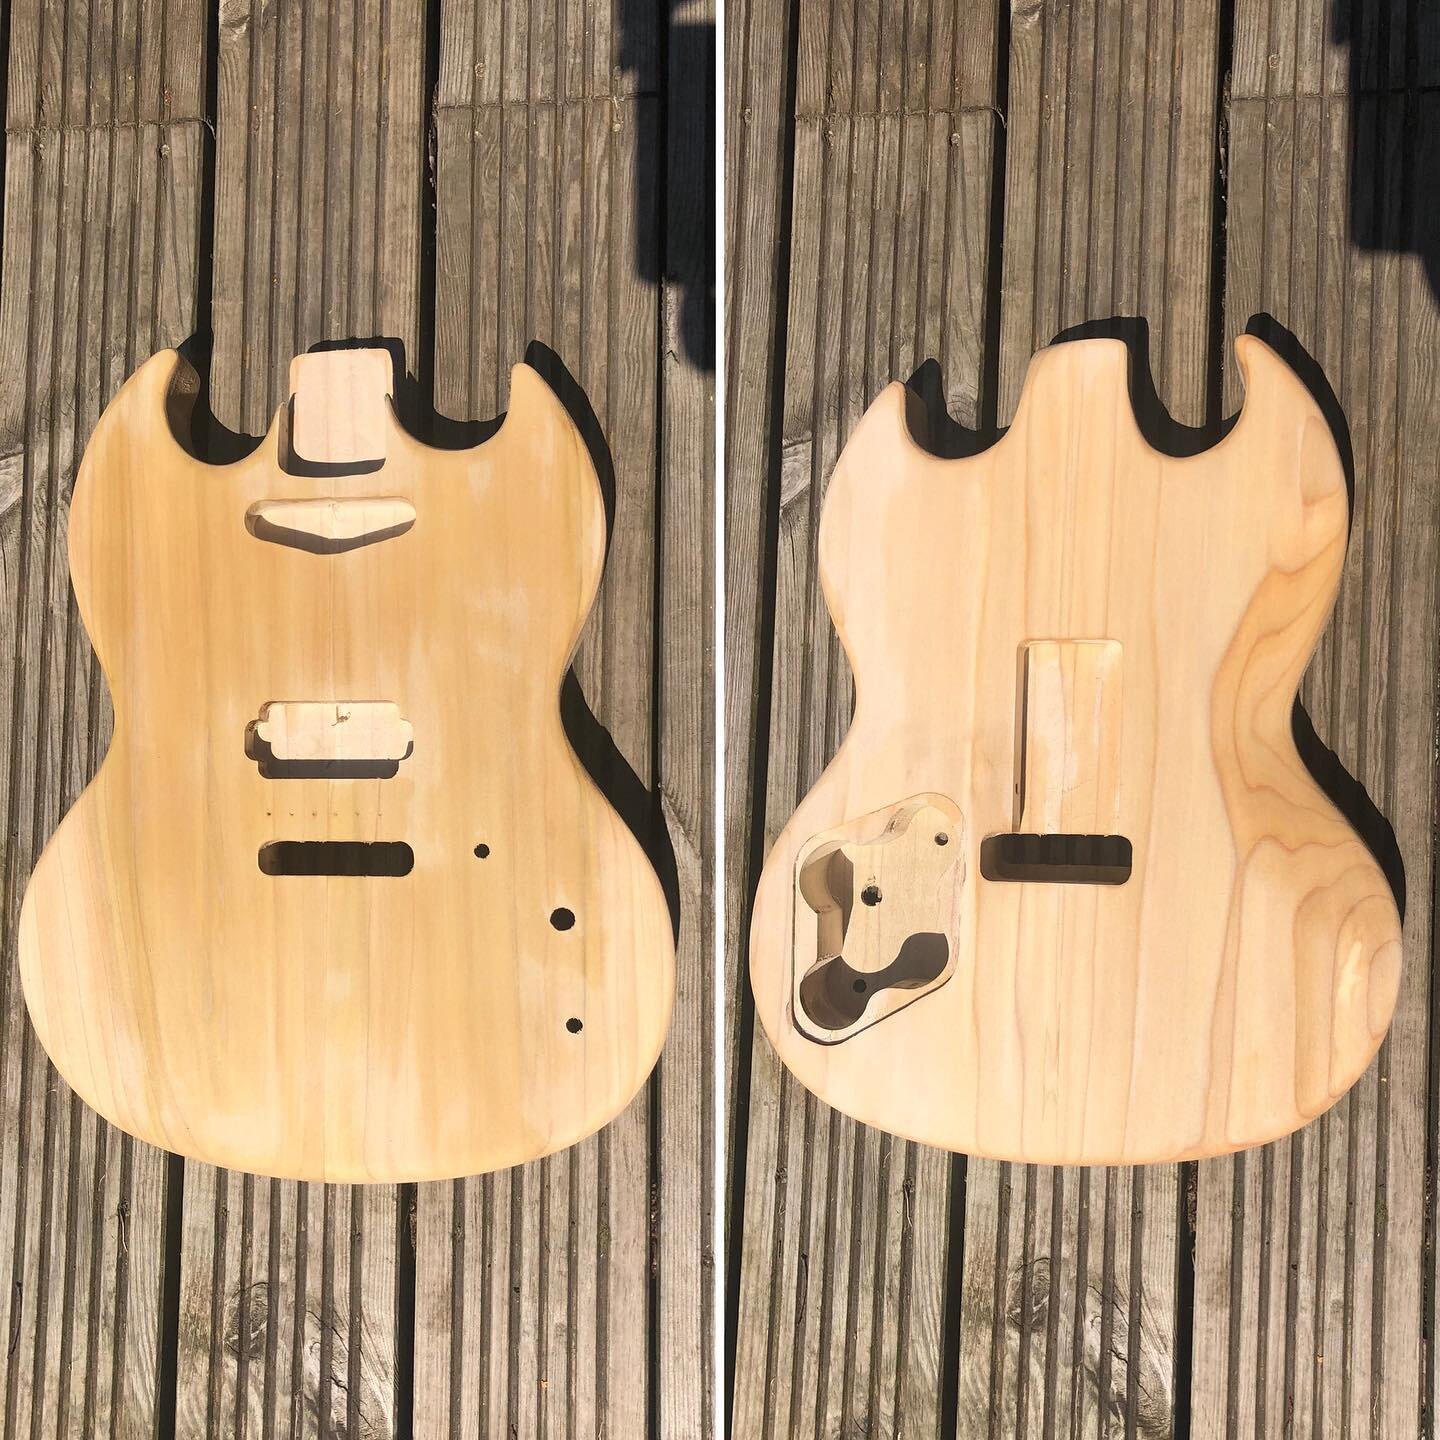 Just finished routing and shaping this SG / Strat hybrid body need to fine sand it now before staining 🙂
&middot;
🙂 For more info on my guitars go to www.mayburyguitars.com #stratocaster #guitar #luthiery #boutiqueguitars #strat #guitarbody #handma